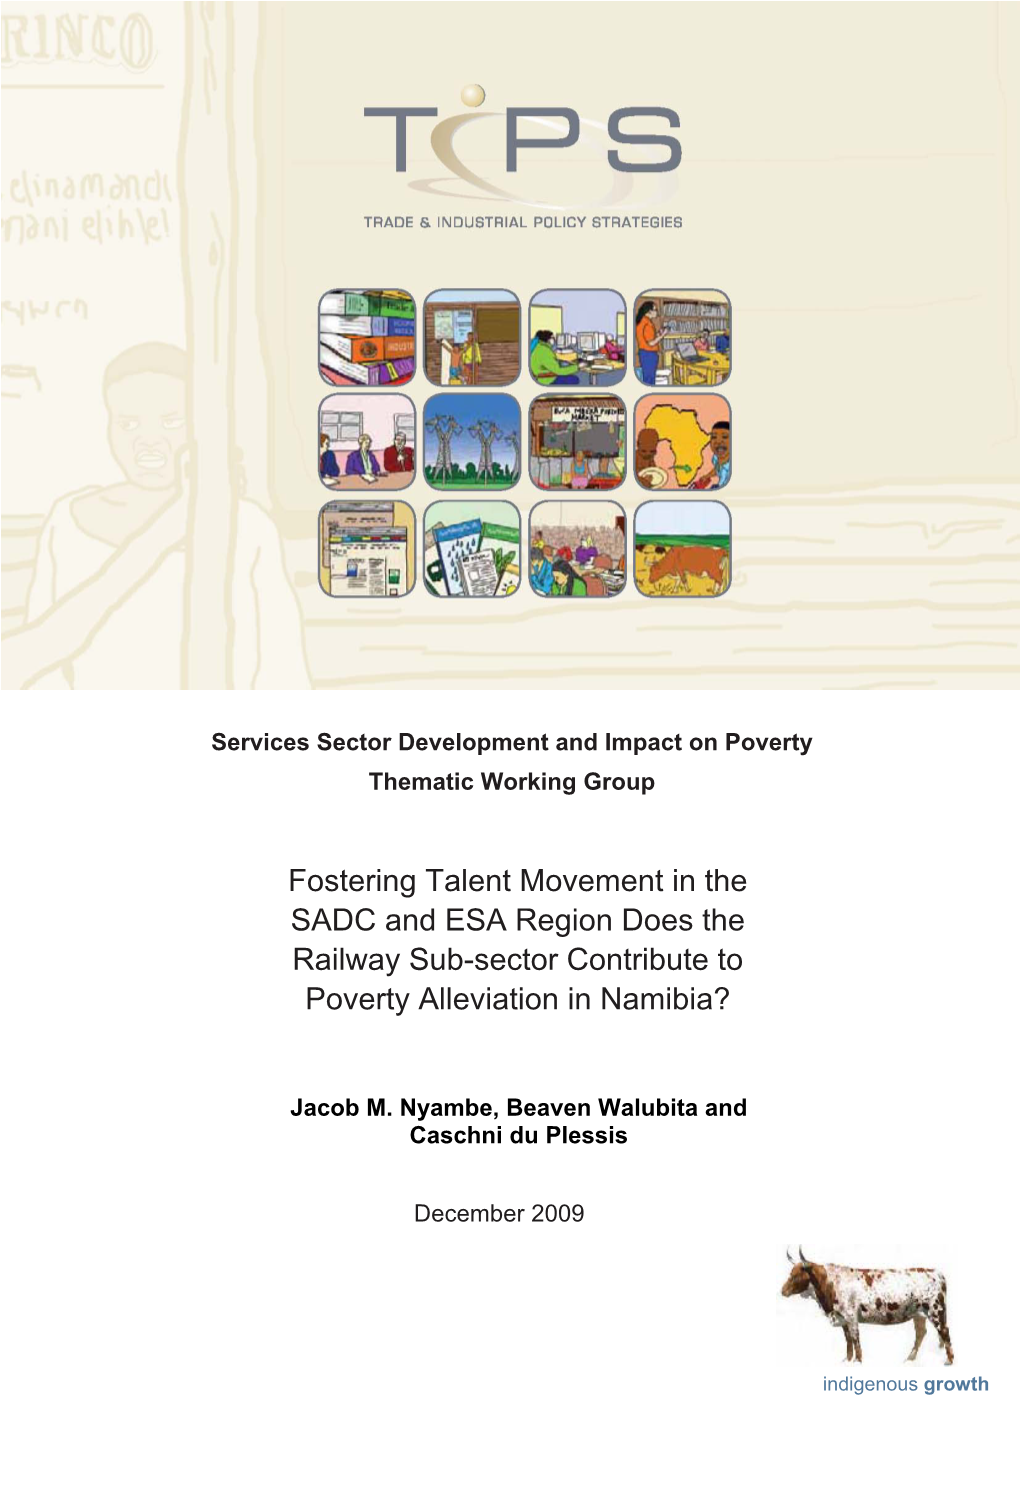 Fostering Talent Movement in the SADC and ESA Region Does the Railway Sub-Sector Contribute to Poverty Alleviation in Namibia?